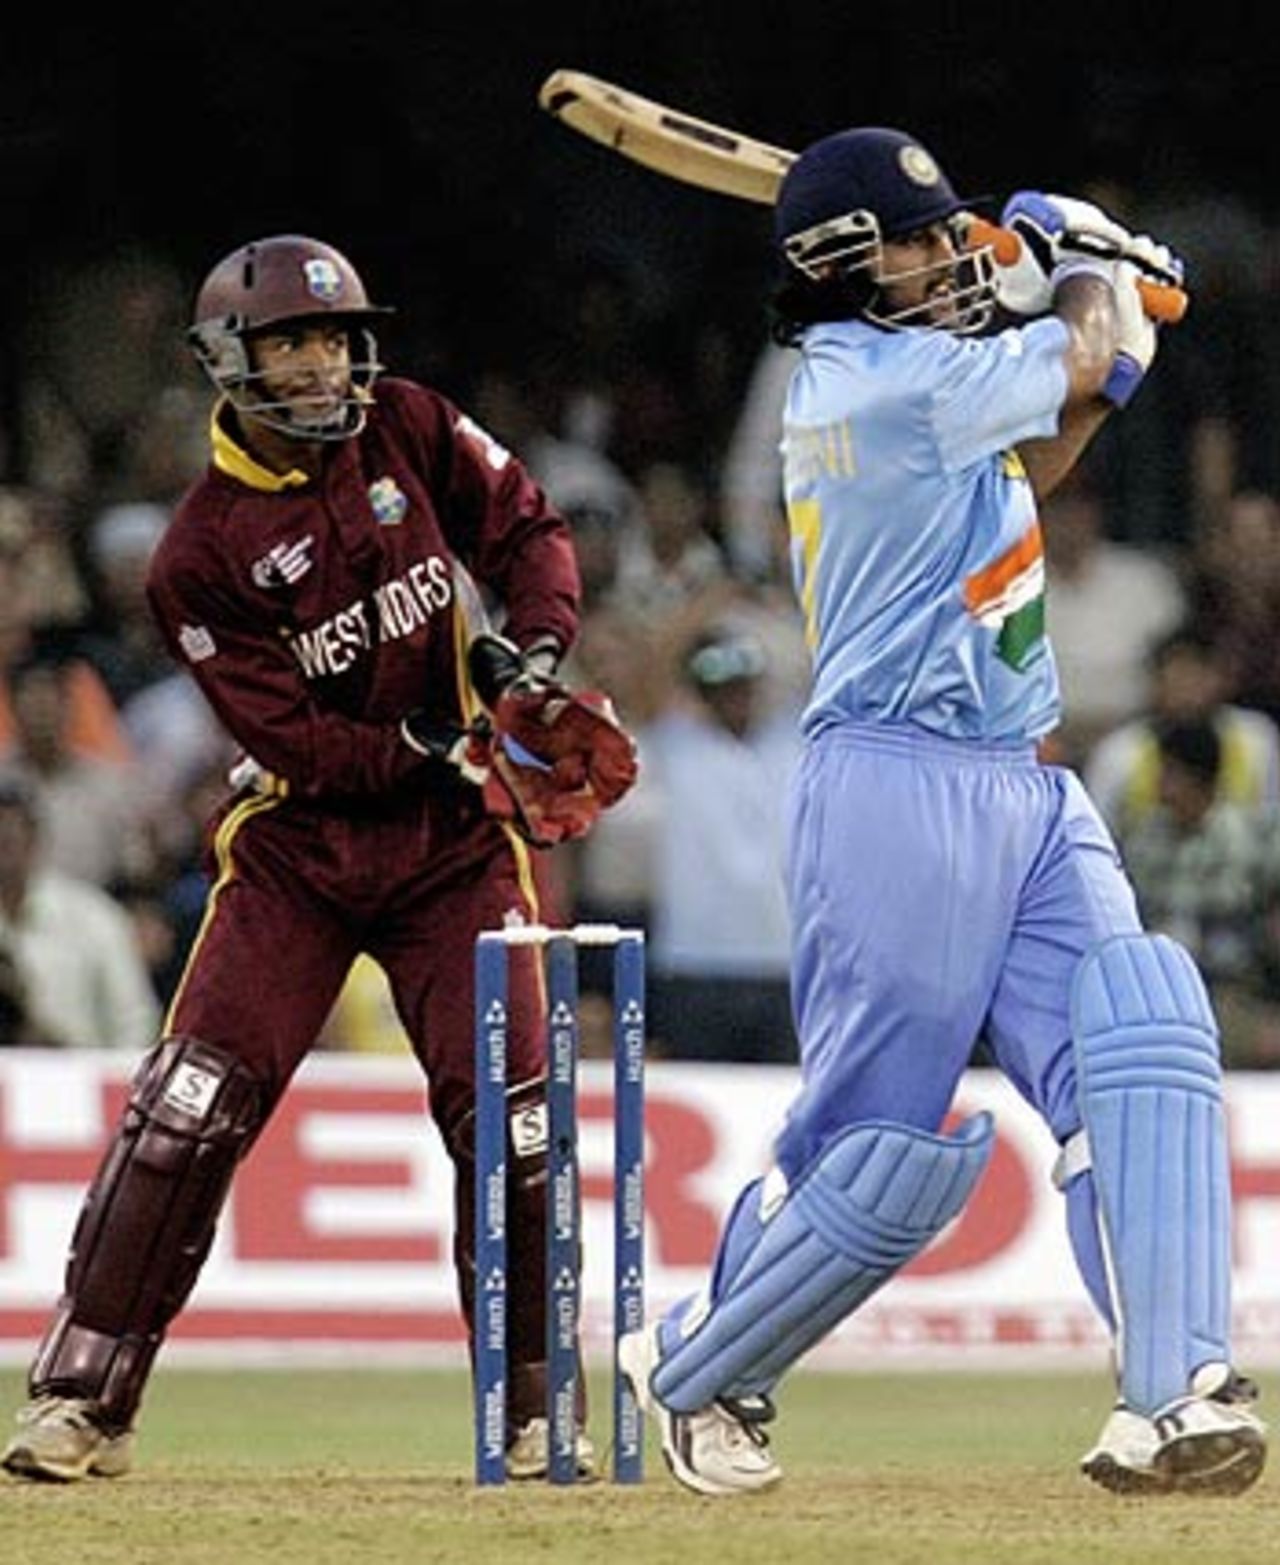 Mahendra Singh Dhoni smashes a six over midwicket, India v West Indies, 9th match, Champions Trophy, Ahmedabad, October 26, 2006